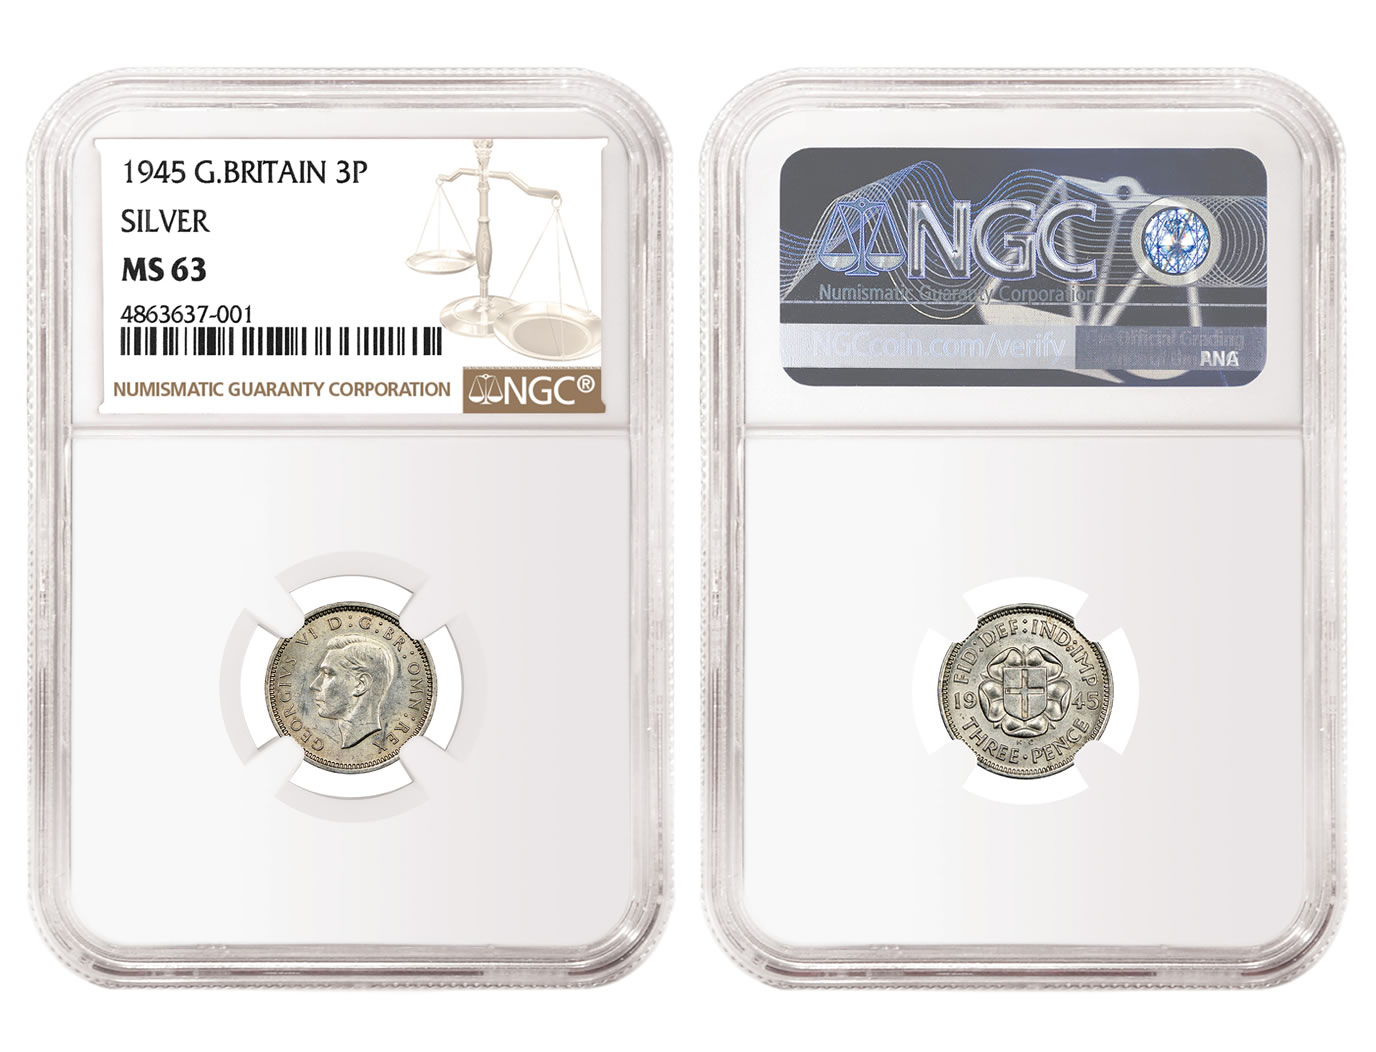 NGC-Certified 1945 Silver Threepence Sells for £62,000 | CoinNews